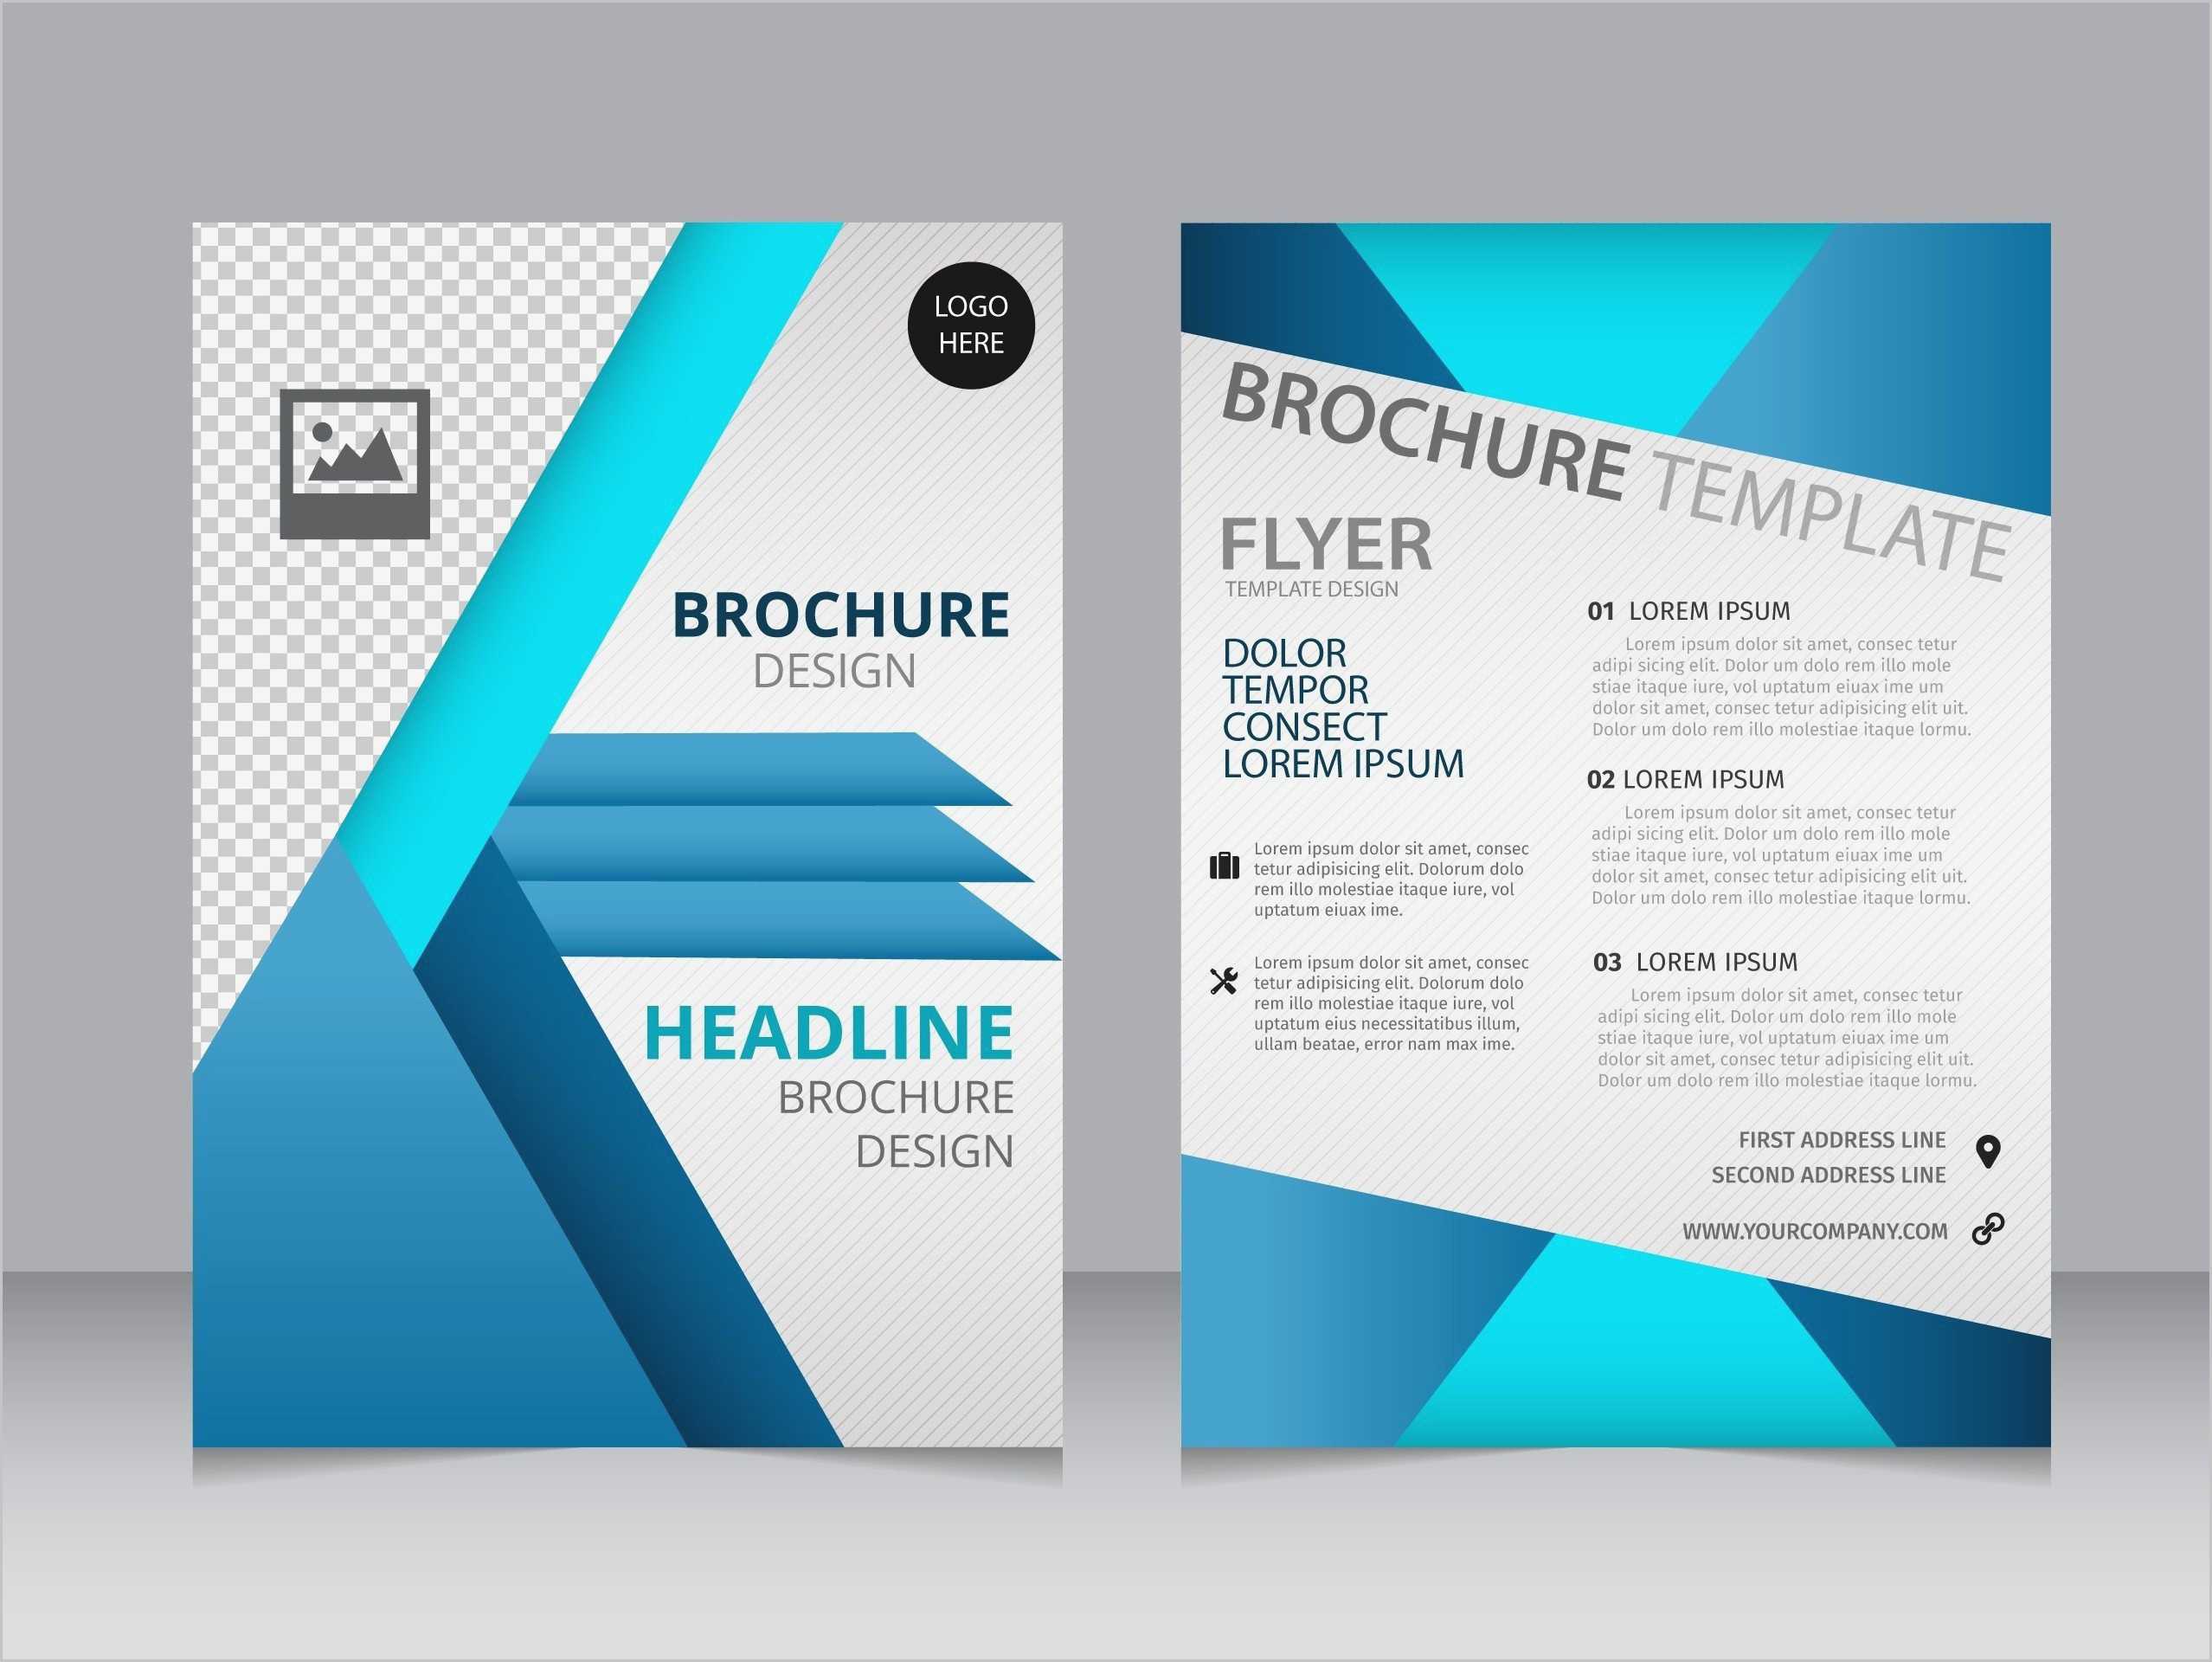 Brochure Design Templates Free Download Ppt – Veser.vtngcf Within Microsoft Word Brochure Template Free